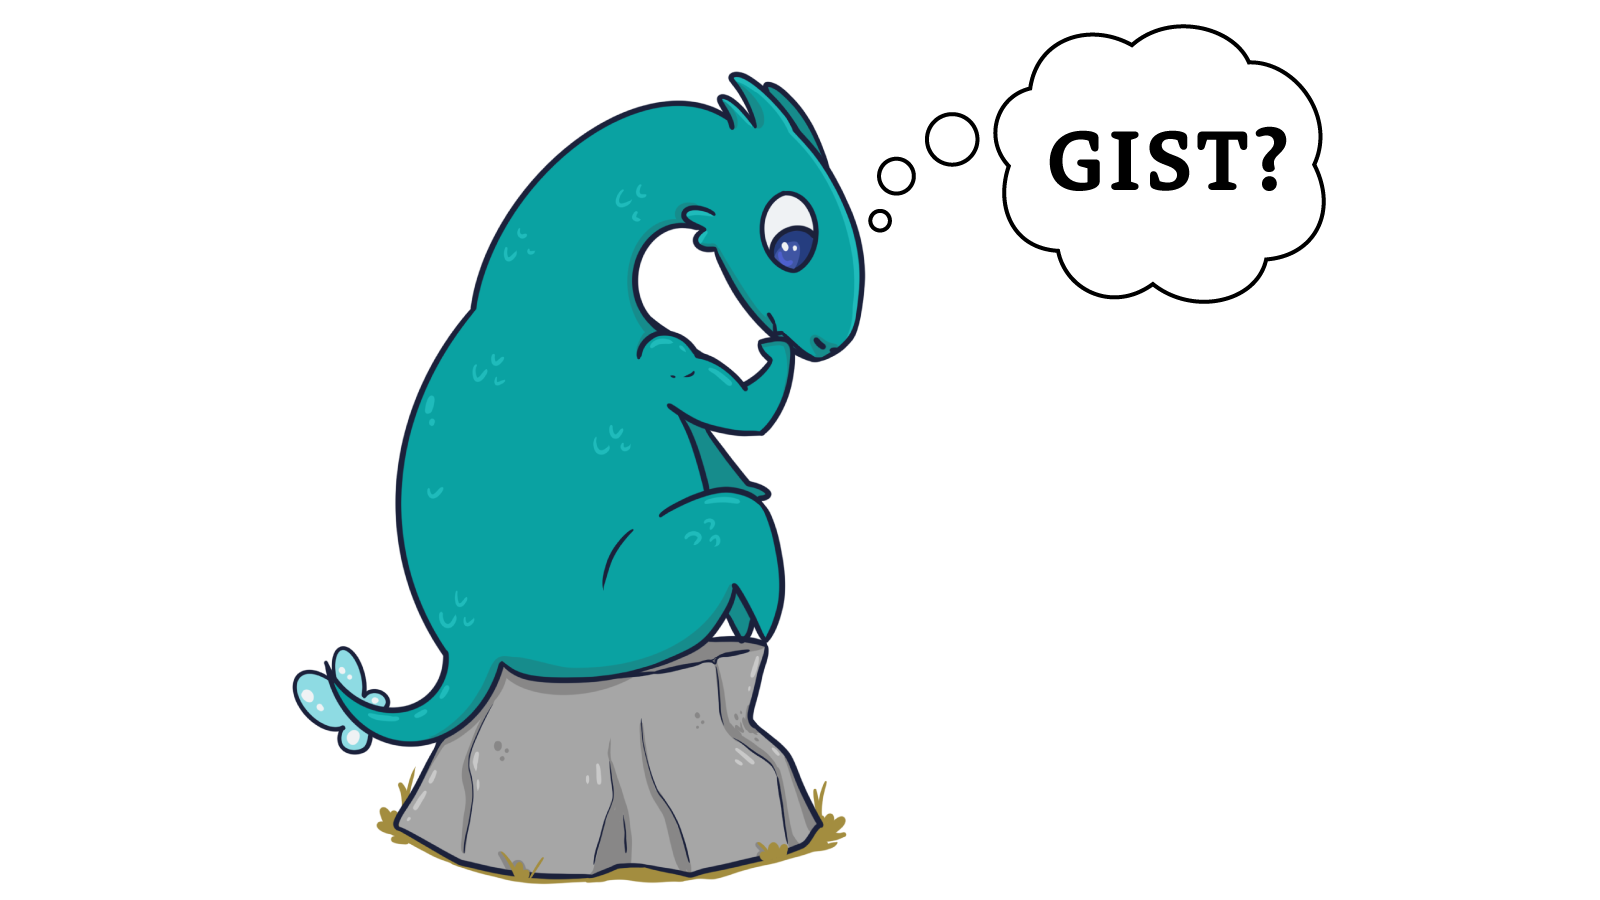 GIST for Games (Development): Is GIST the Right Tool for Your Project Planning?